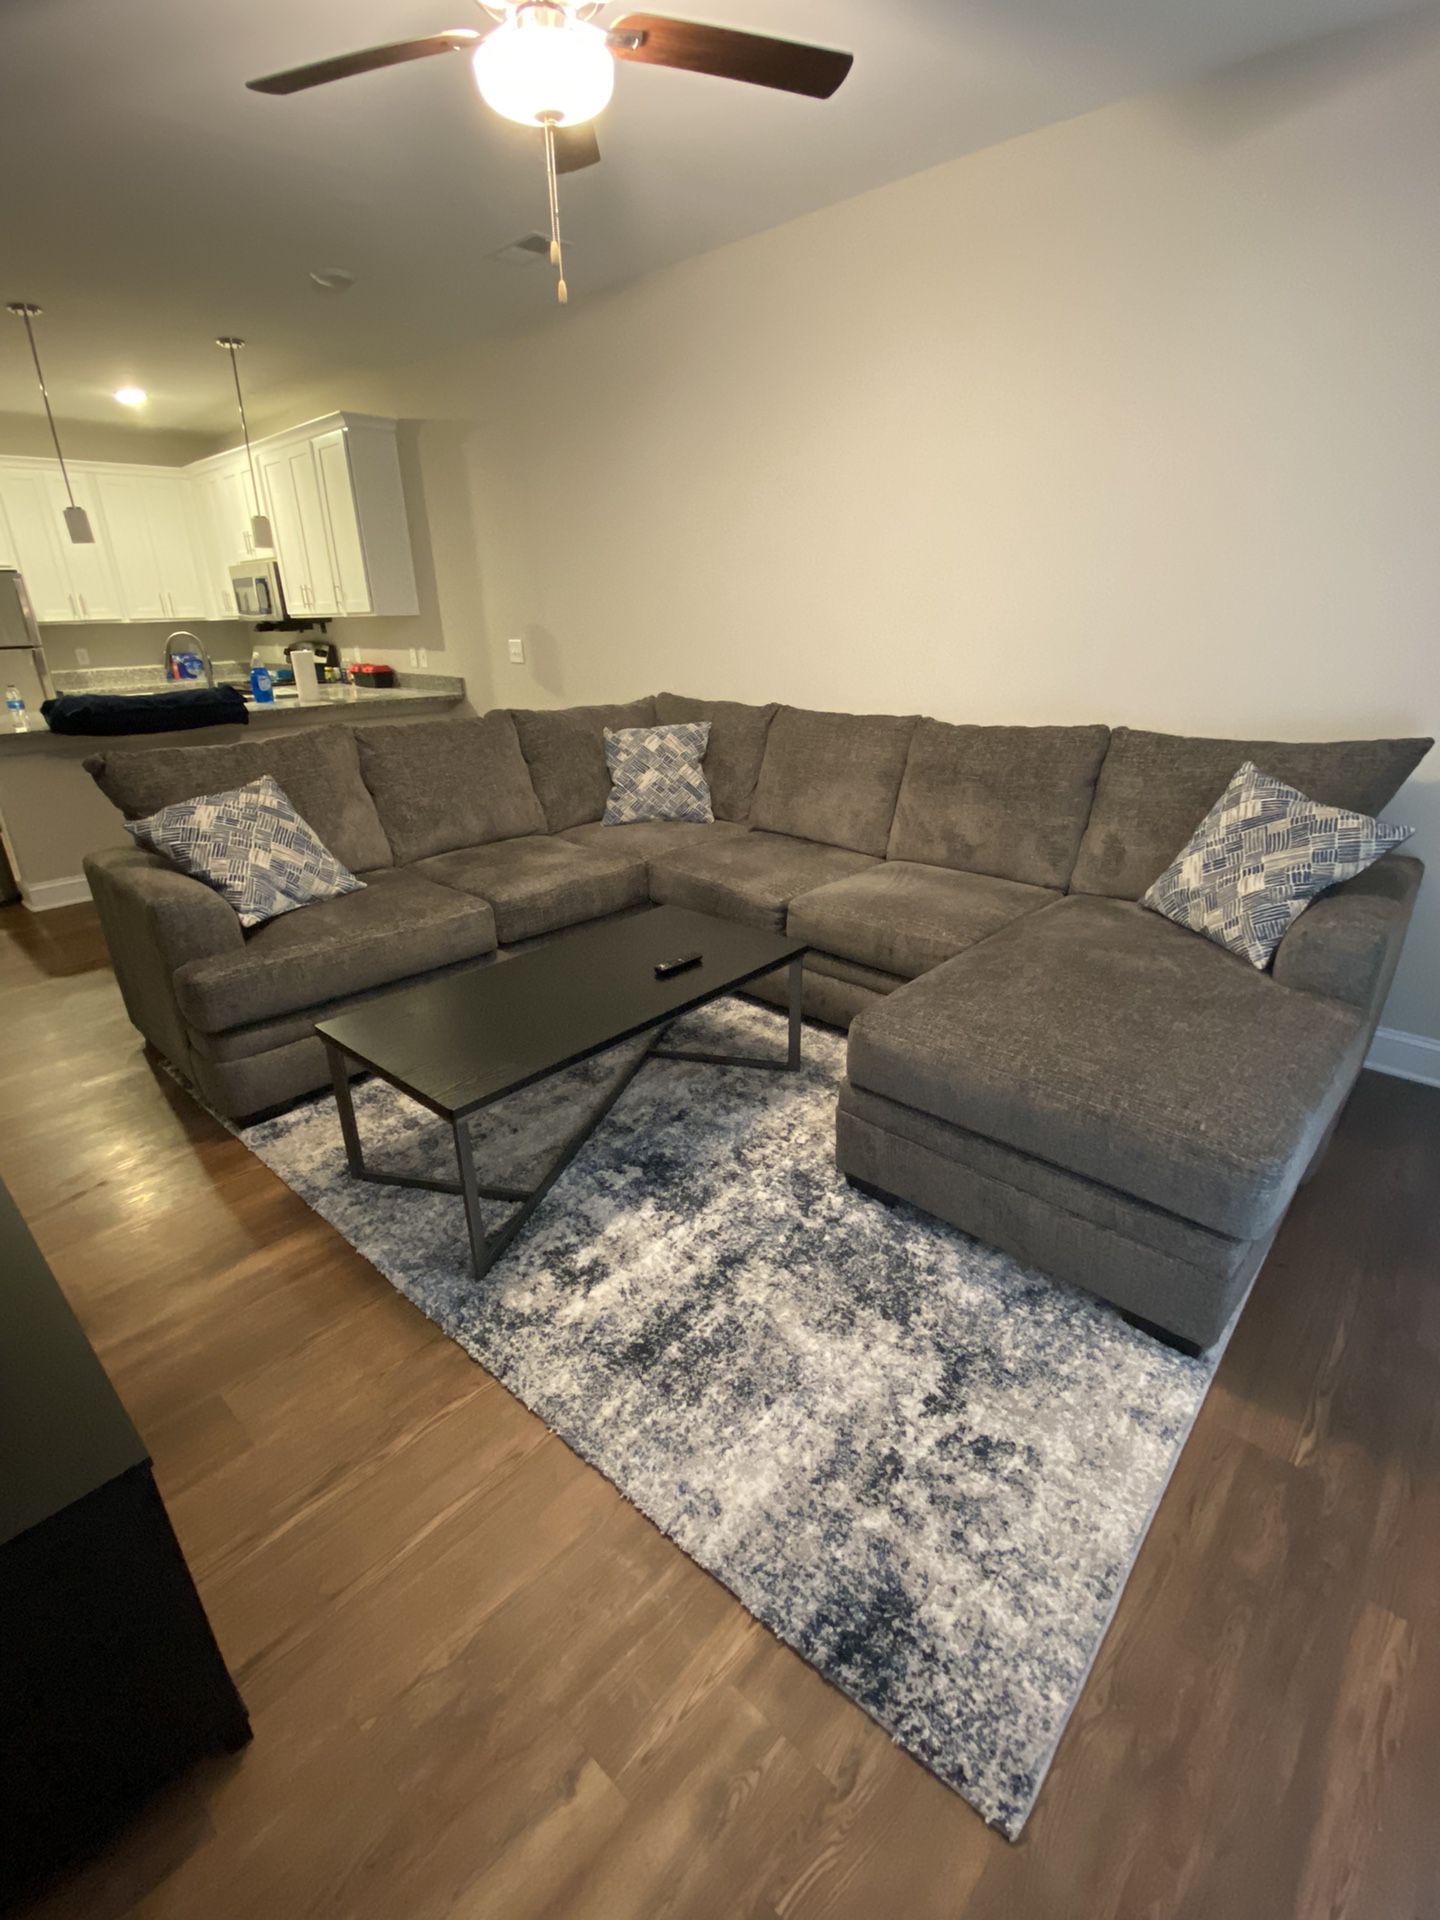 Couch + Table + Area Rug